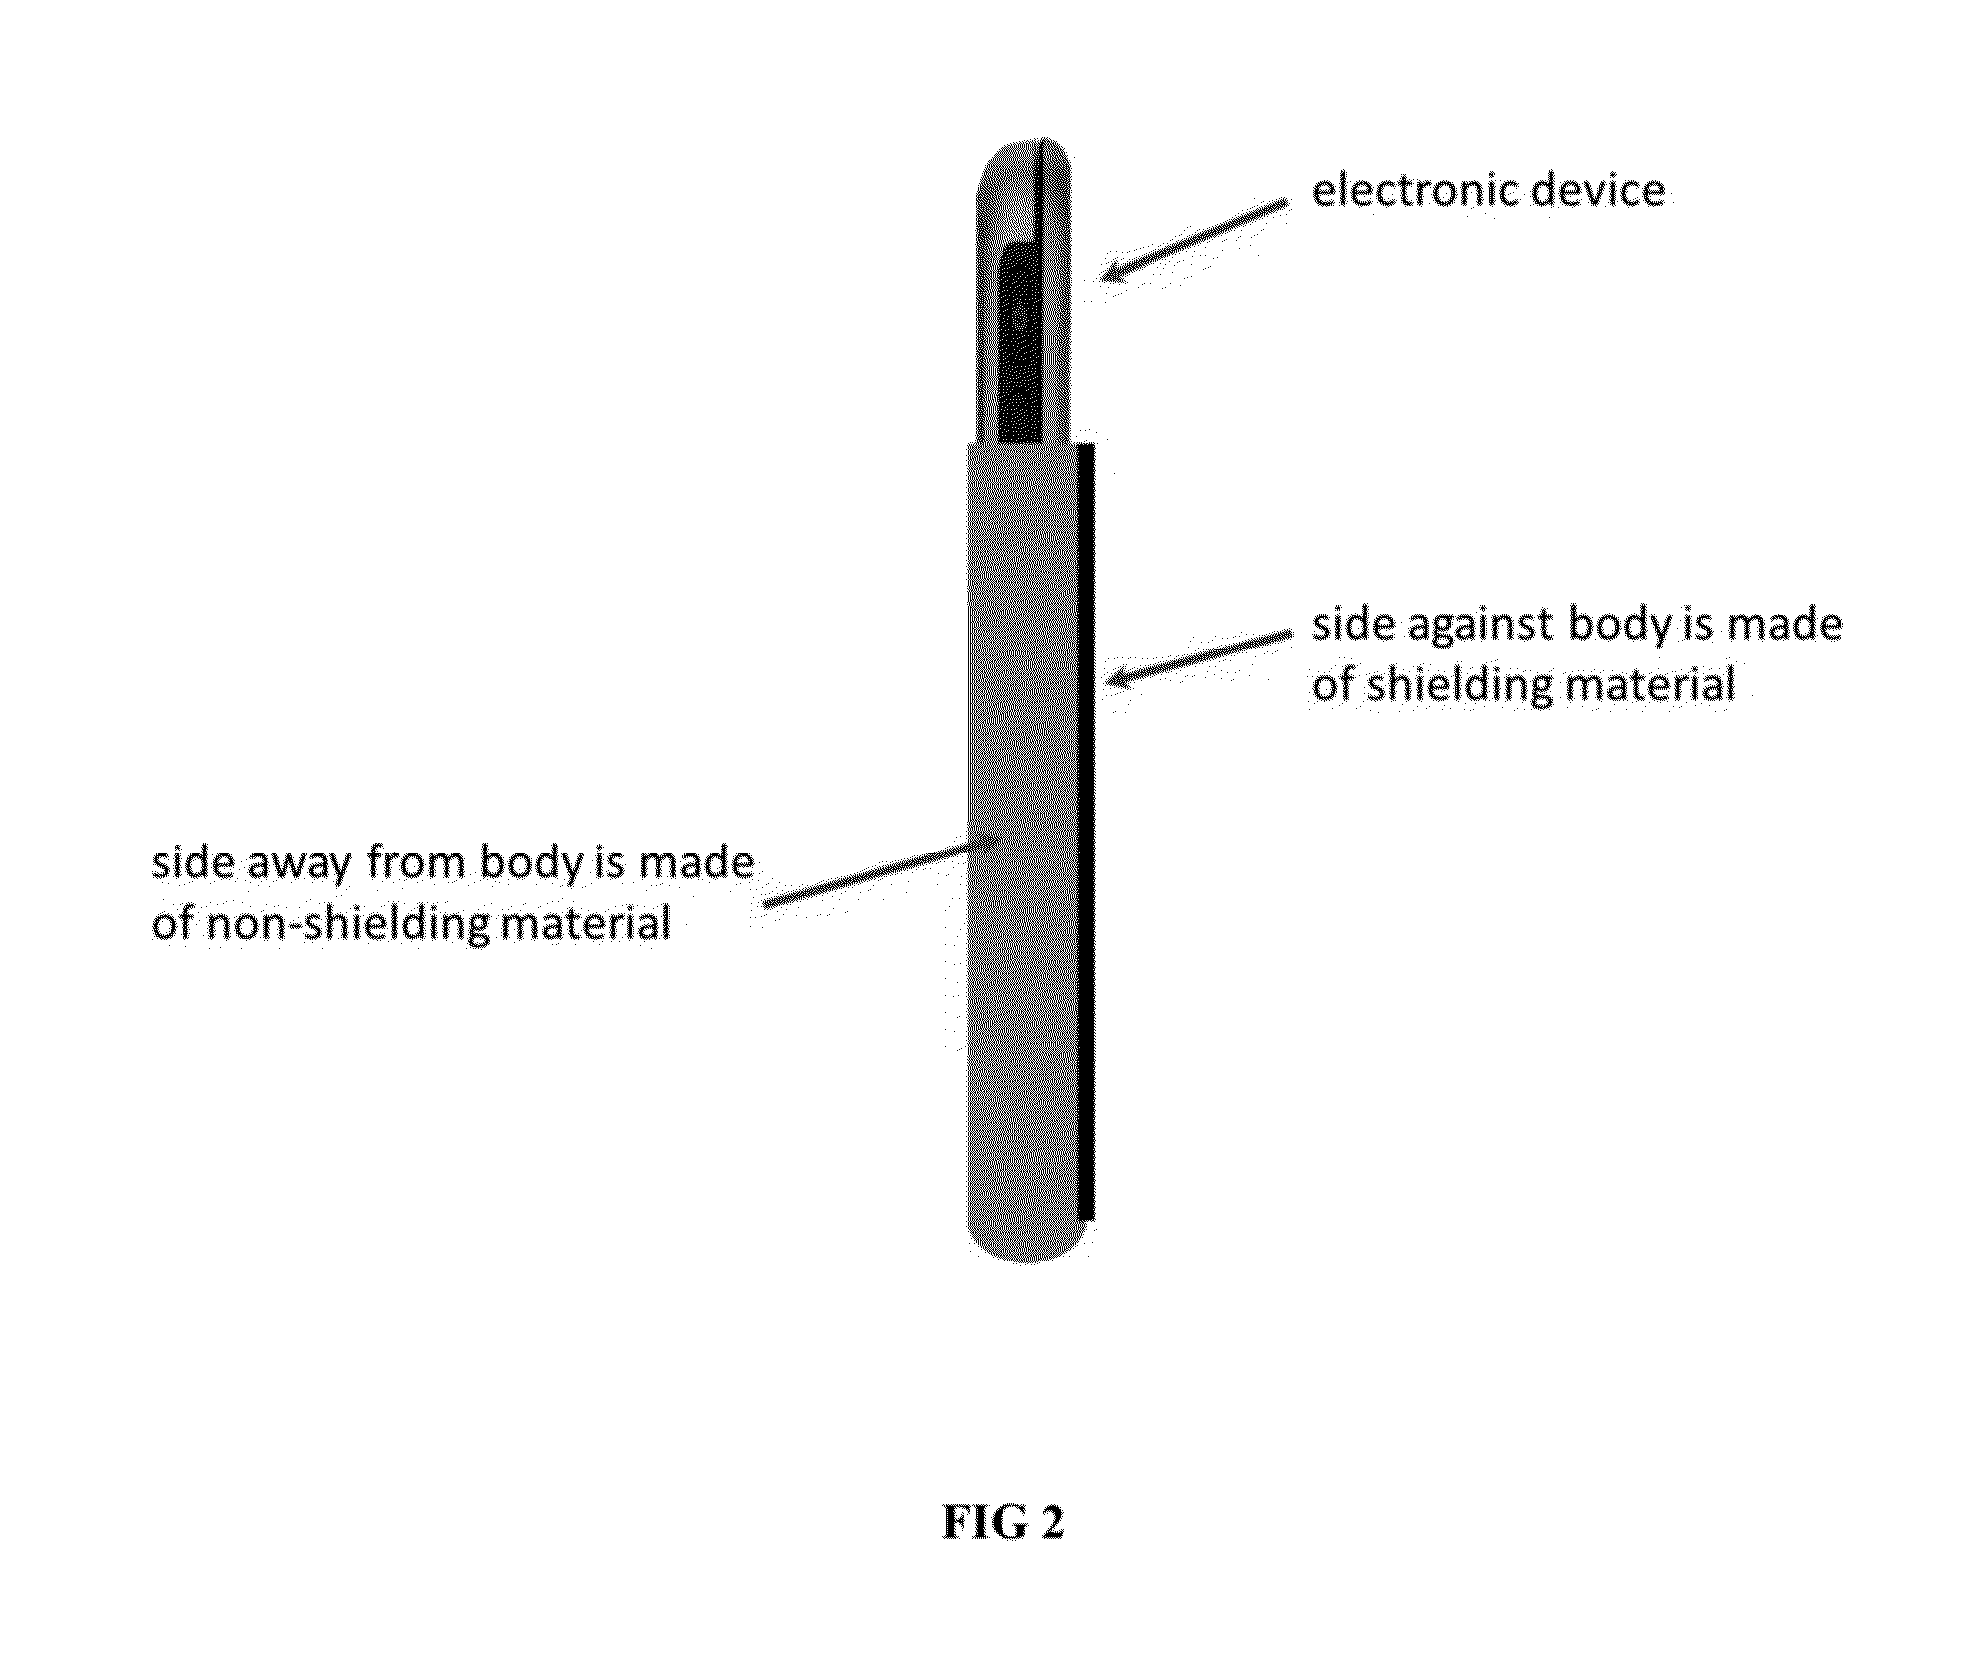 Thin Pocket Liner and Pad for Protection Against Electromagnetic Exposure when Carrying and/or Using Electronic Devices